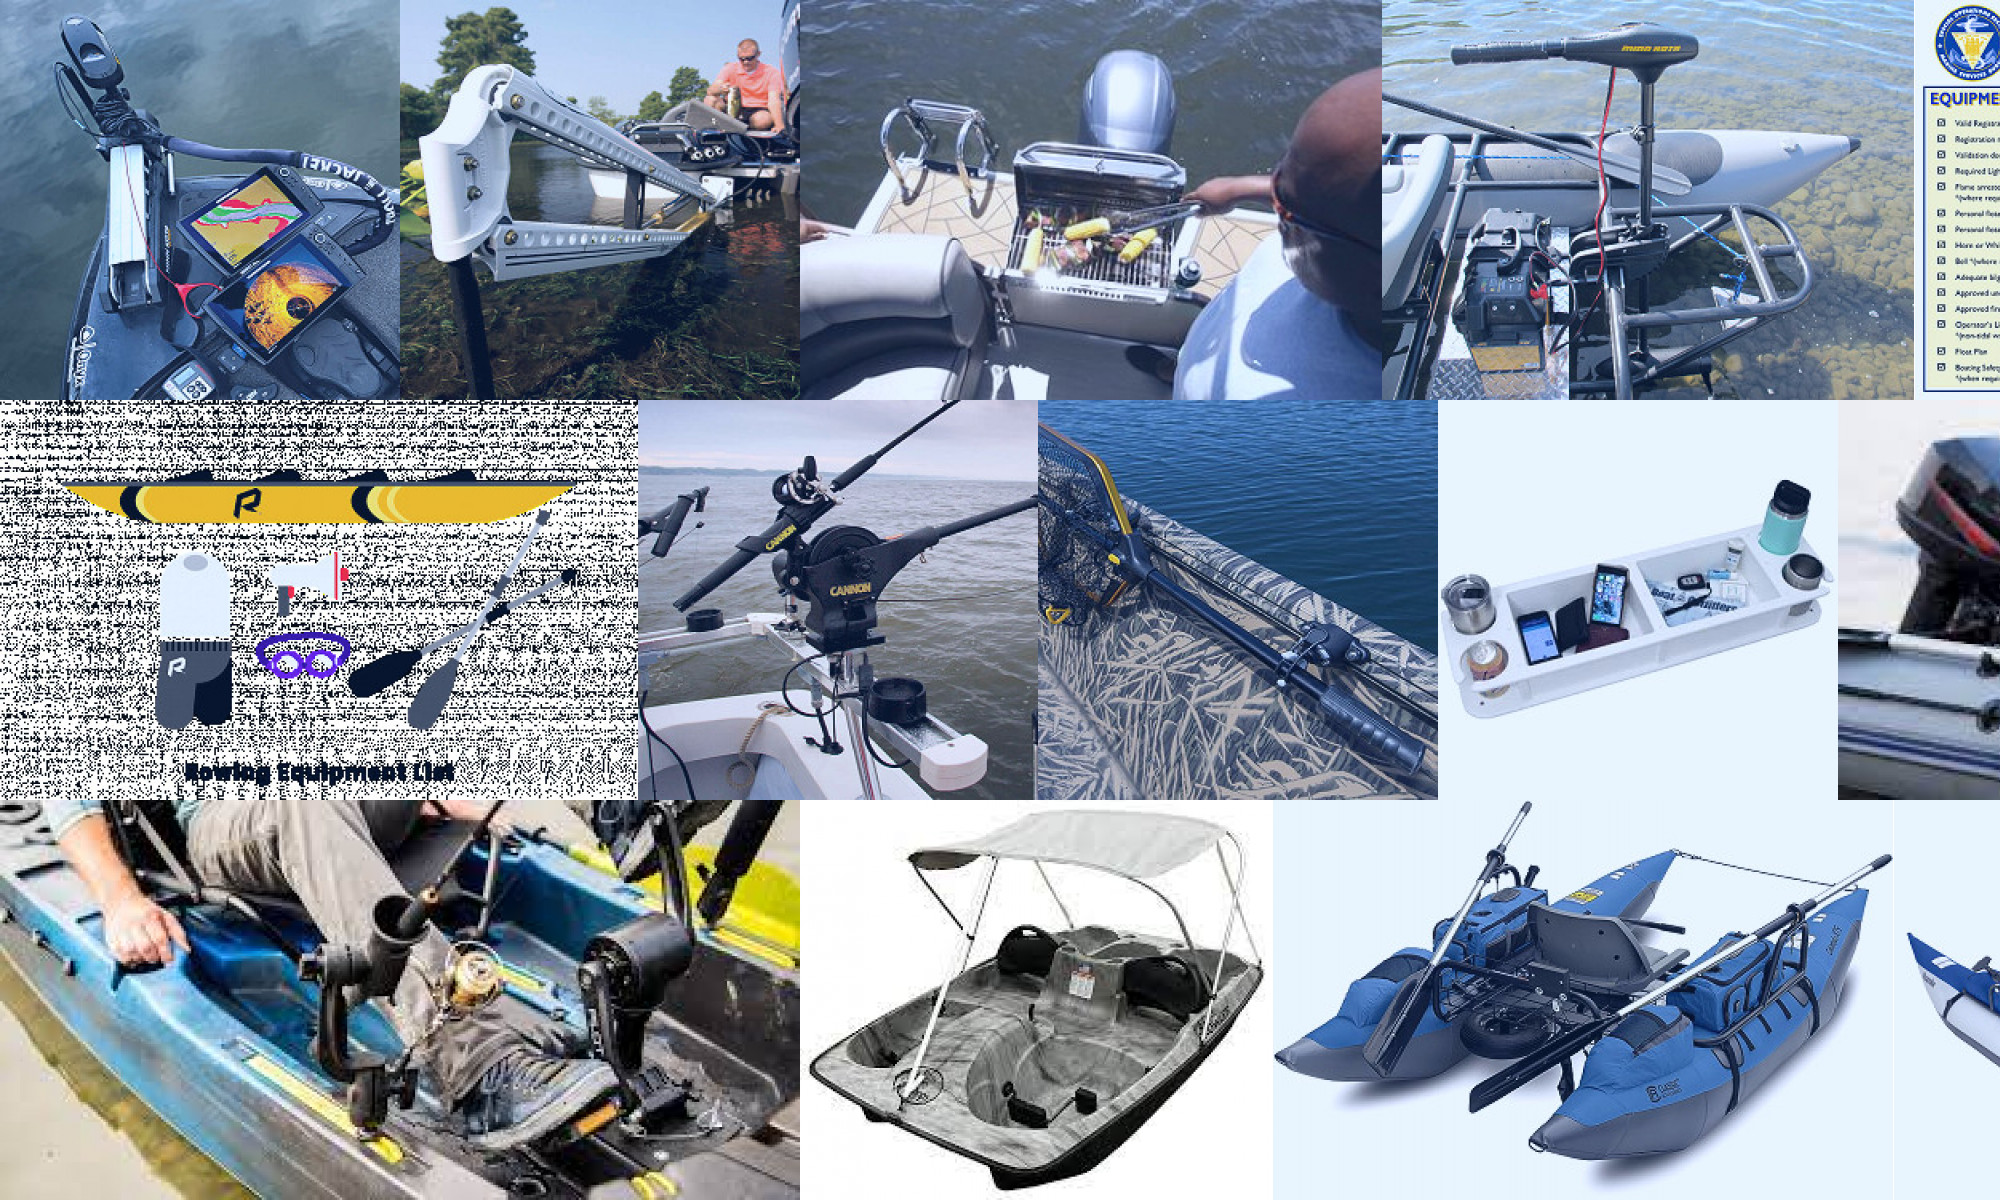 boating equipment and supplies